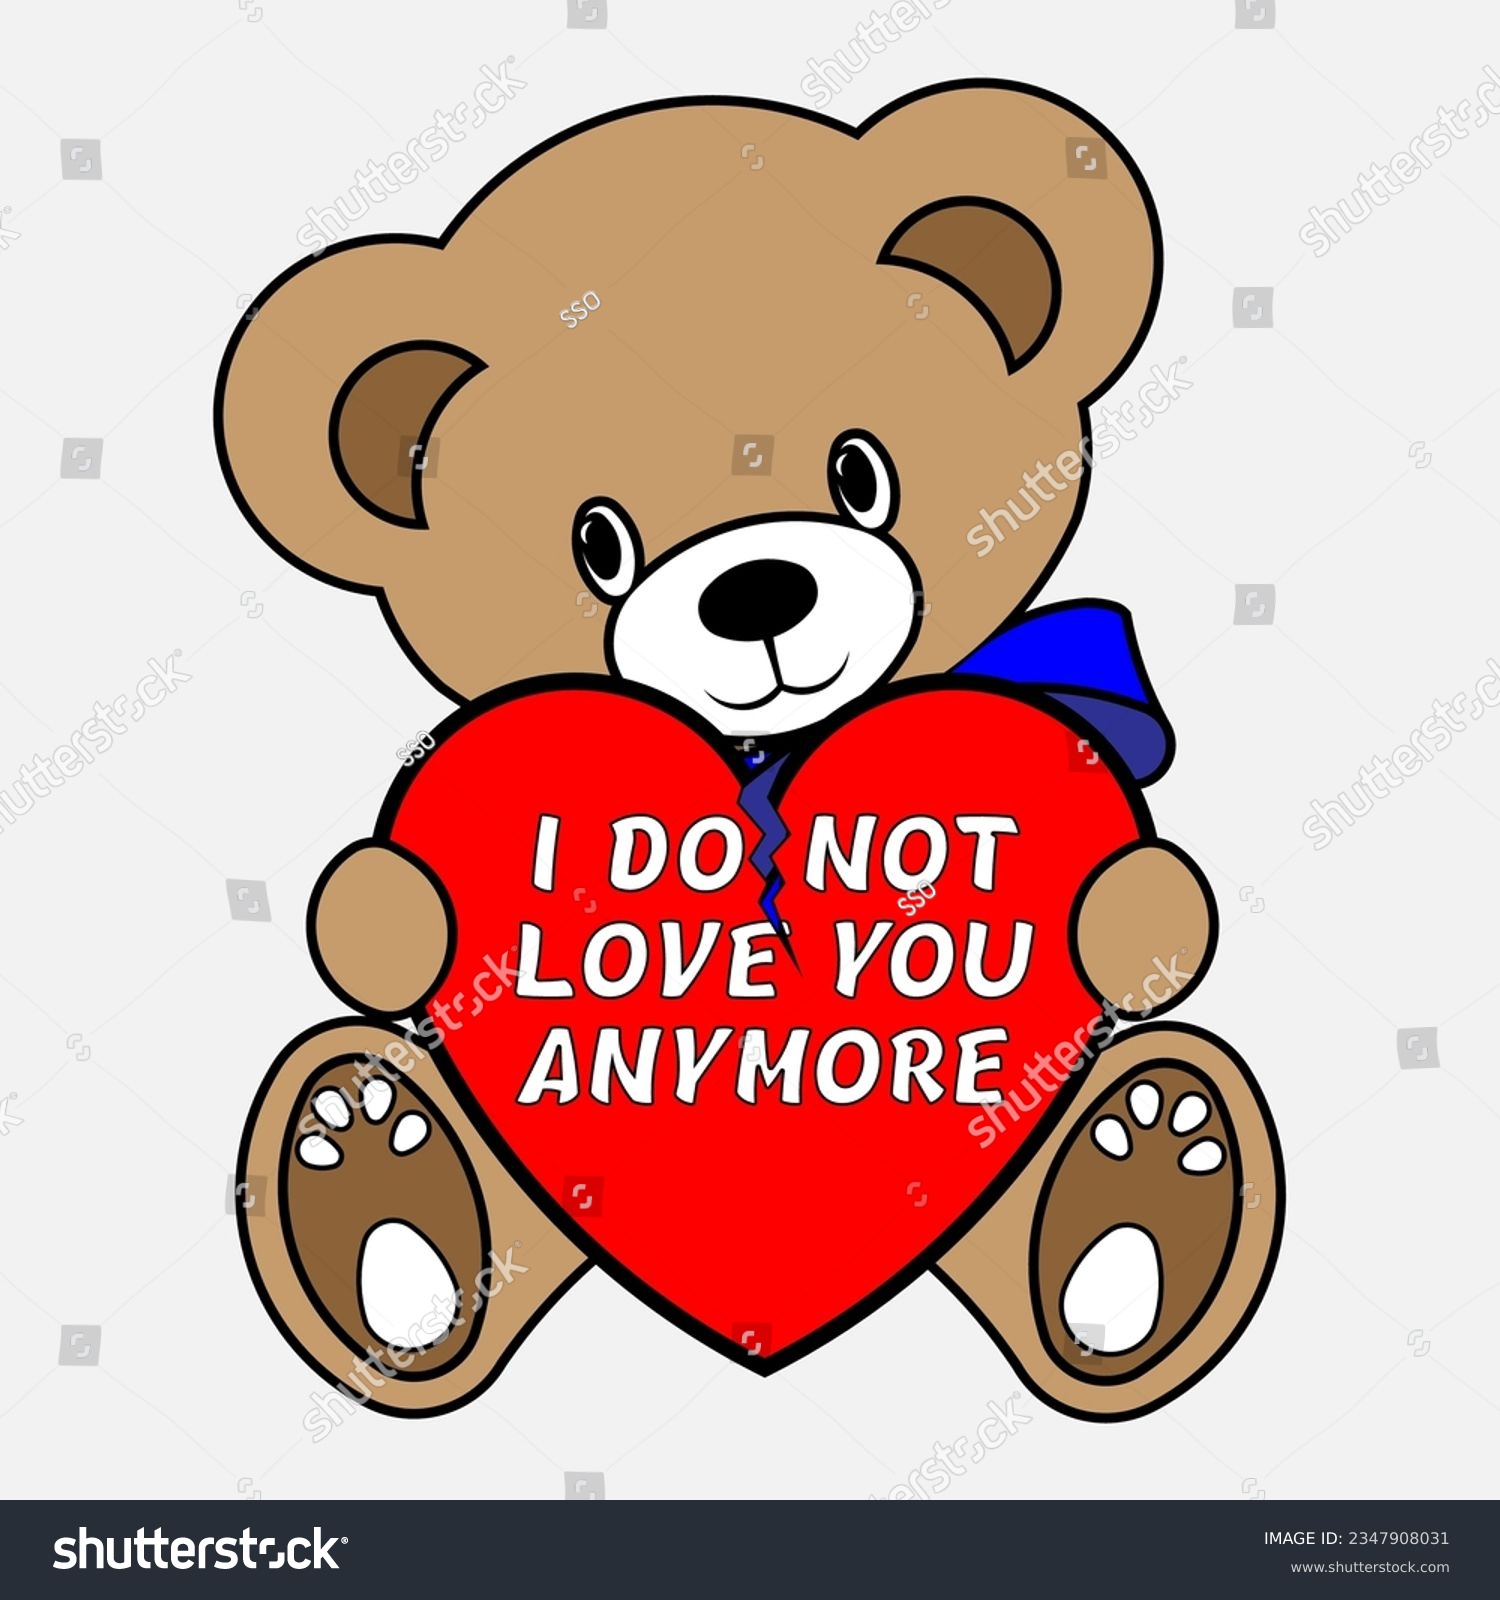 SVG of A Simple Color Vector Image Of A Funny Teddy Bear Holding A Big Broken Heart In Its Paws With The Inscription I DO NOT LOVE YOU ANYMORE svg